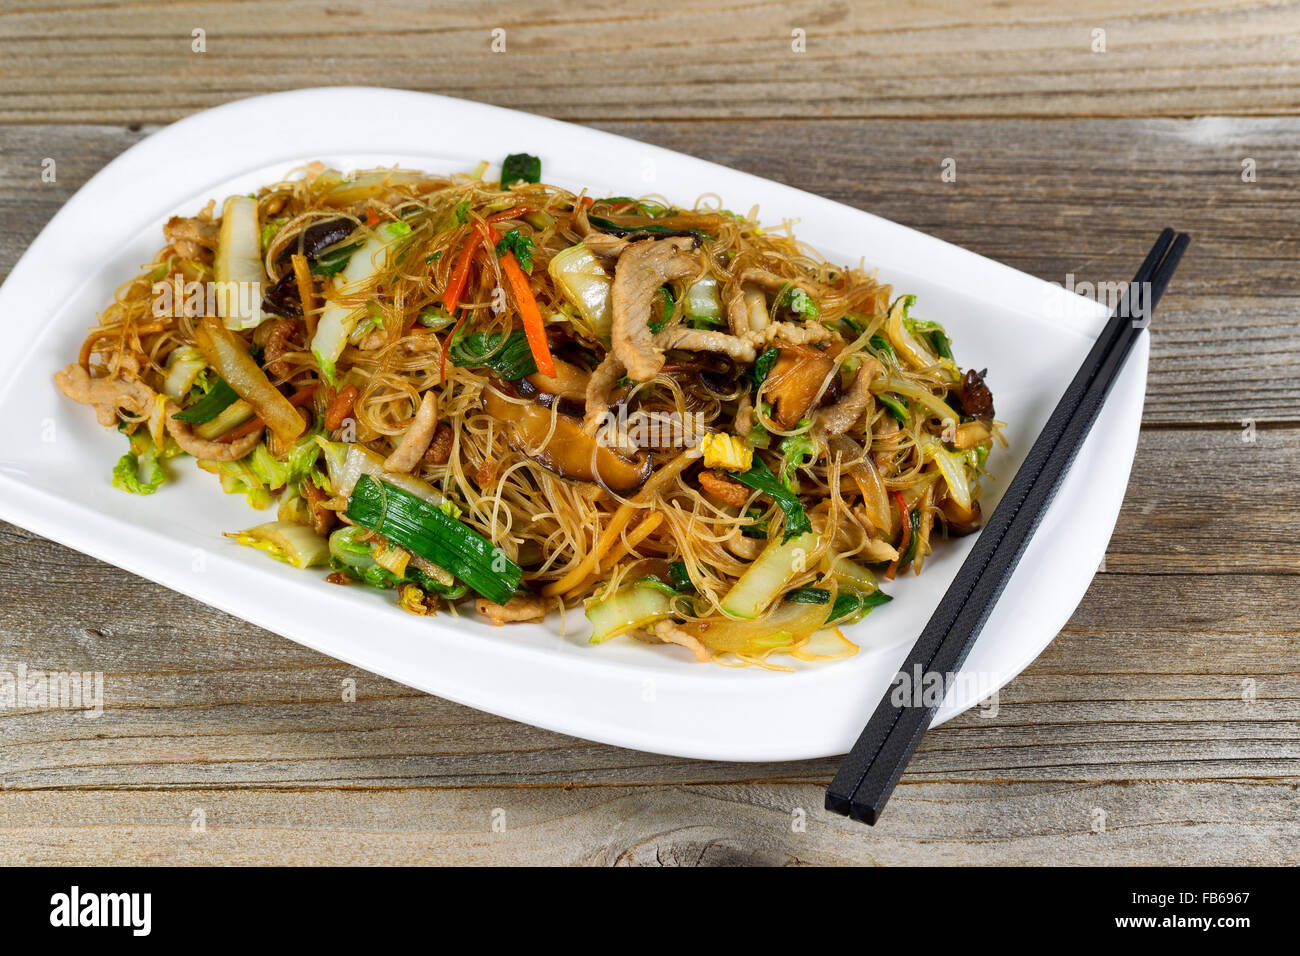 Close up view of chicken strips and rice noodles with vegetables on rustic wood setting. Stock Photo